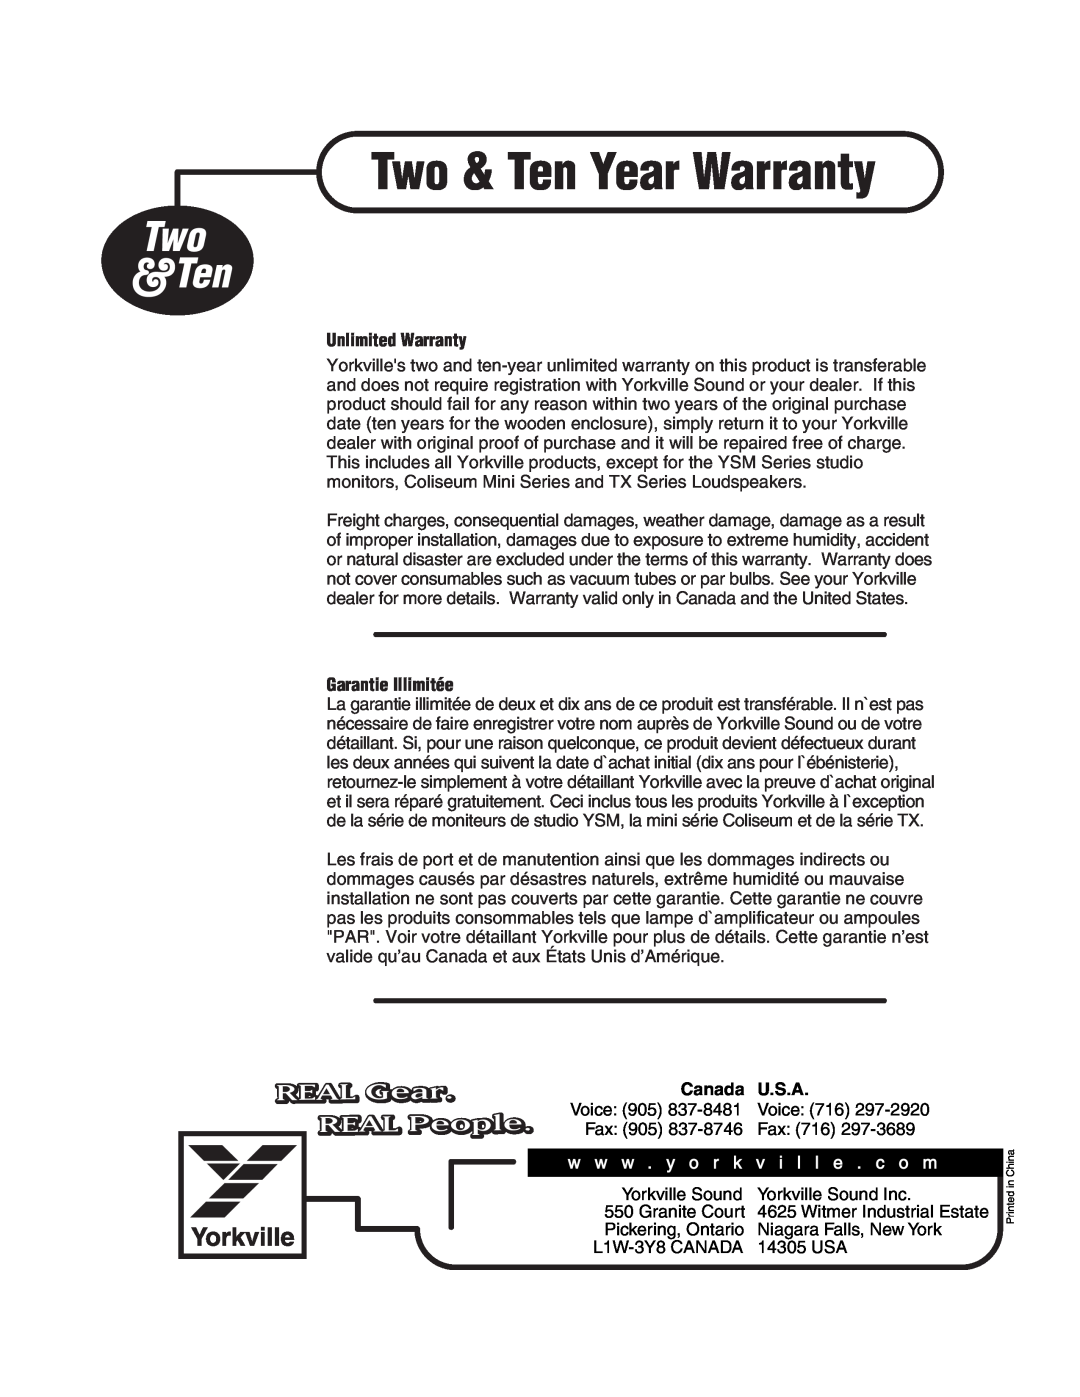 RCA YS1052 owner manual Two & Ten Year Warranty, Two &Ten, REAL Gear, REAL People, w w w . y o r k v i l l e . c o m 